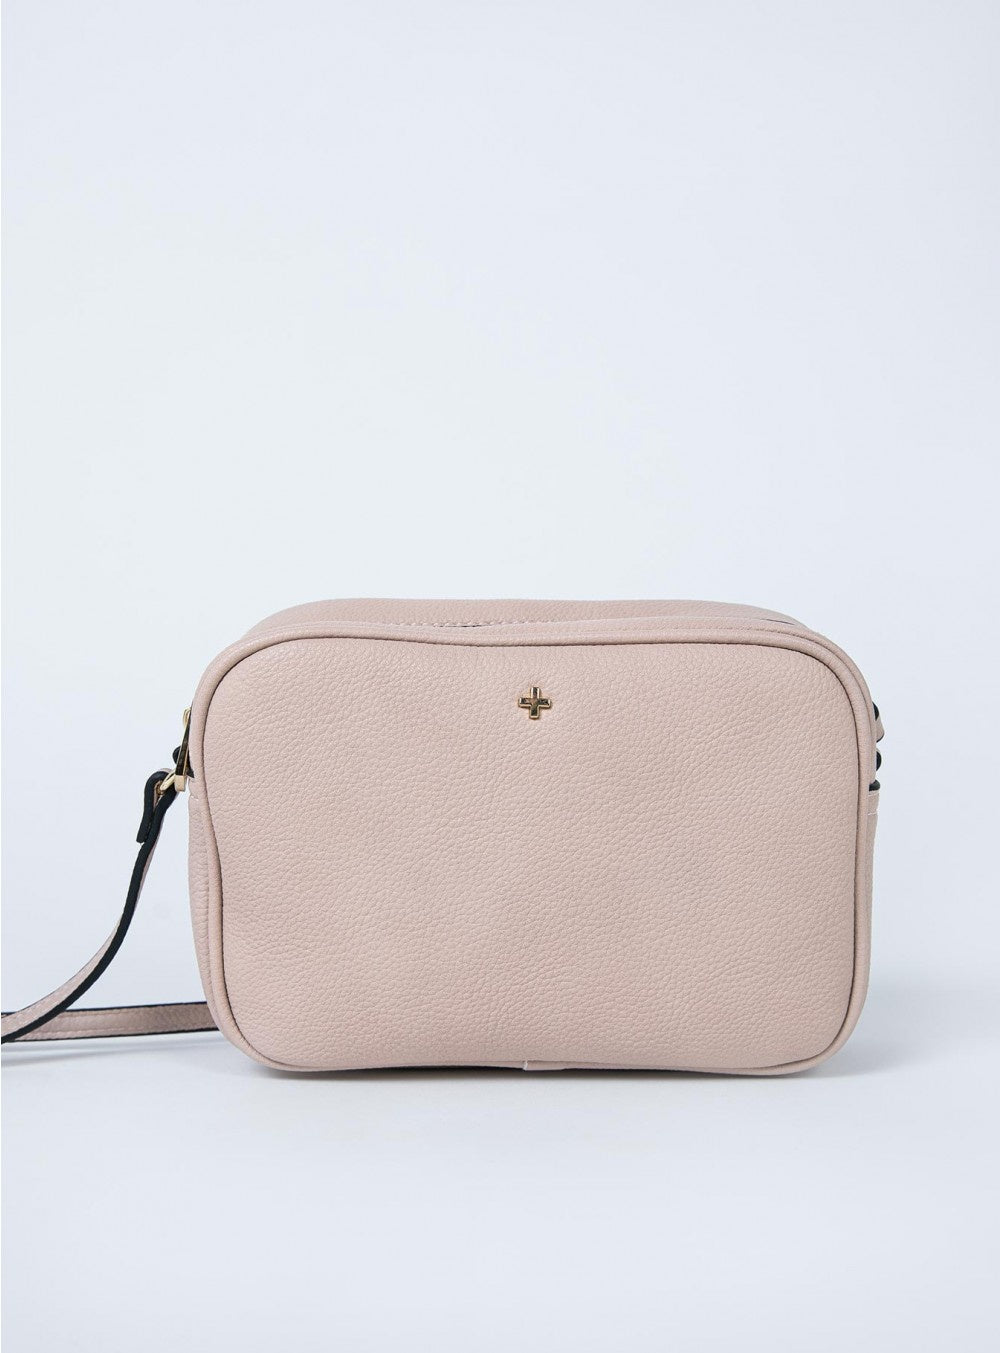 Peta and Jain Gracie Bag - Nude | Mabel and Woods | Women's Fashion